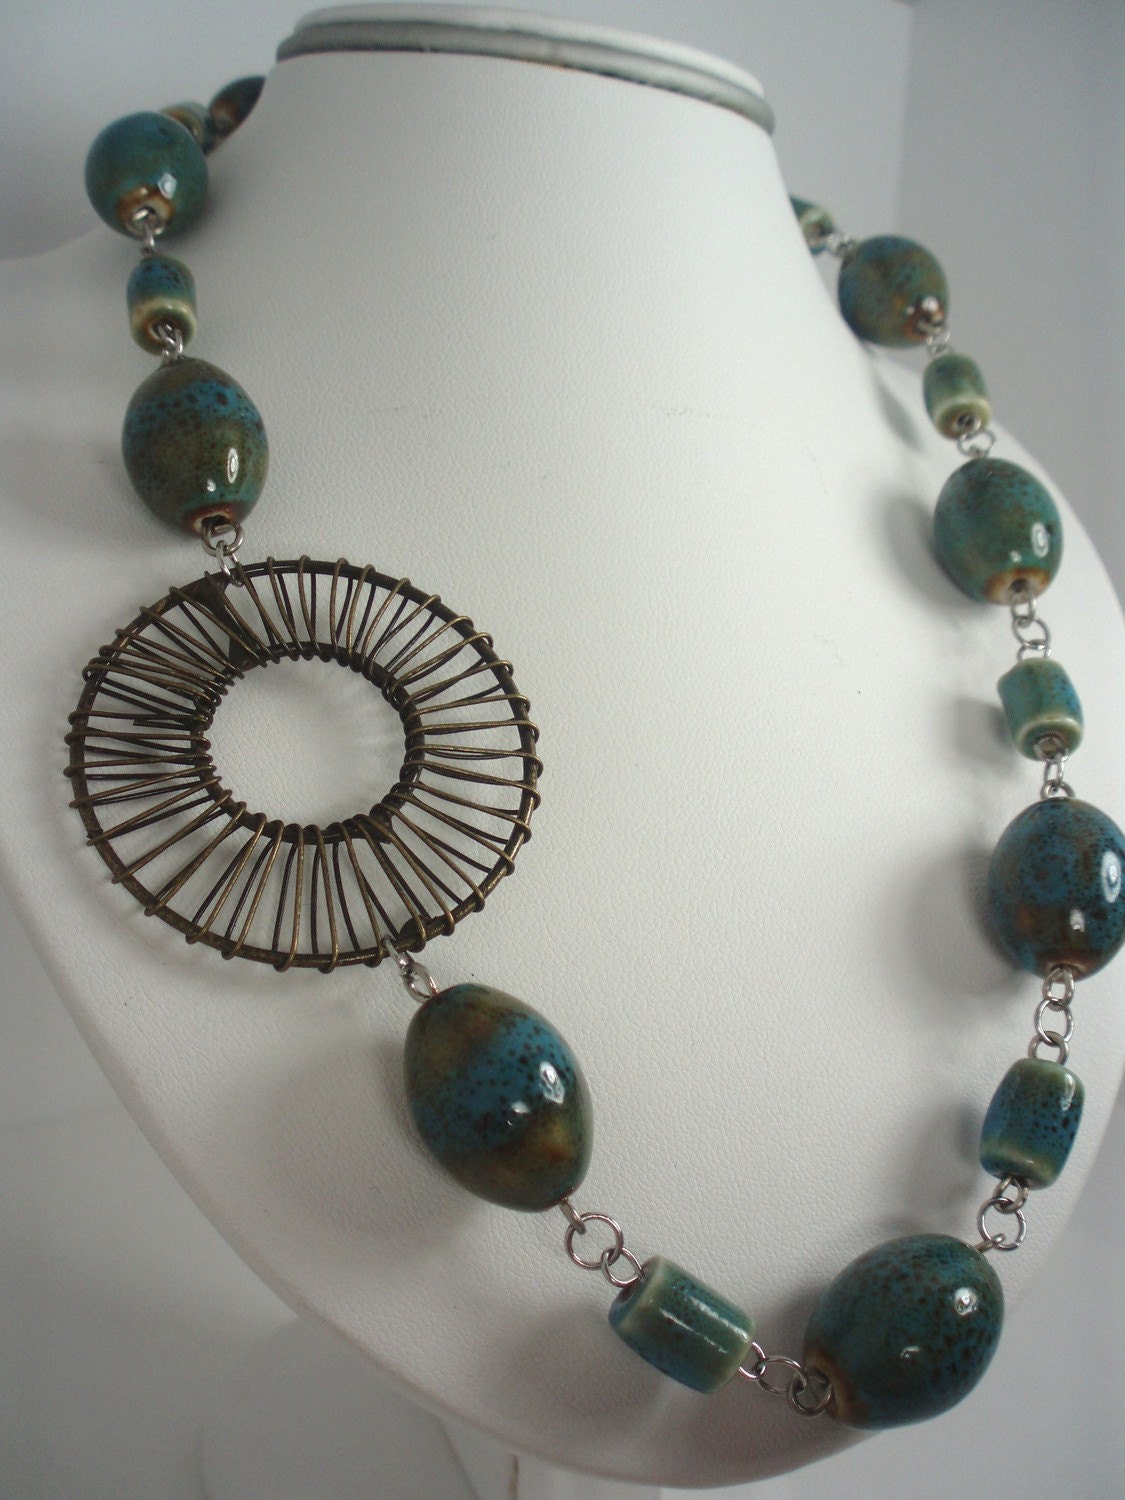 Long Necklace 27" in Green Porcelain Beads and Bronzed Focal Round Metal Bead